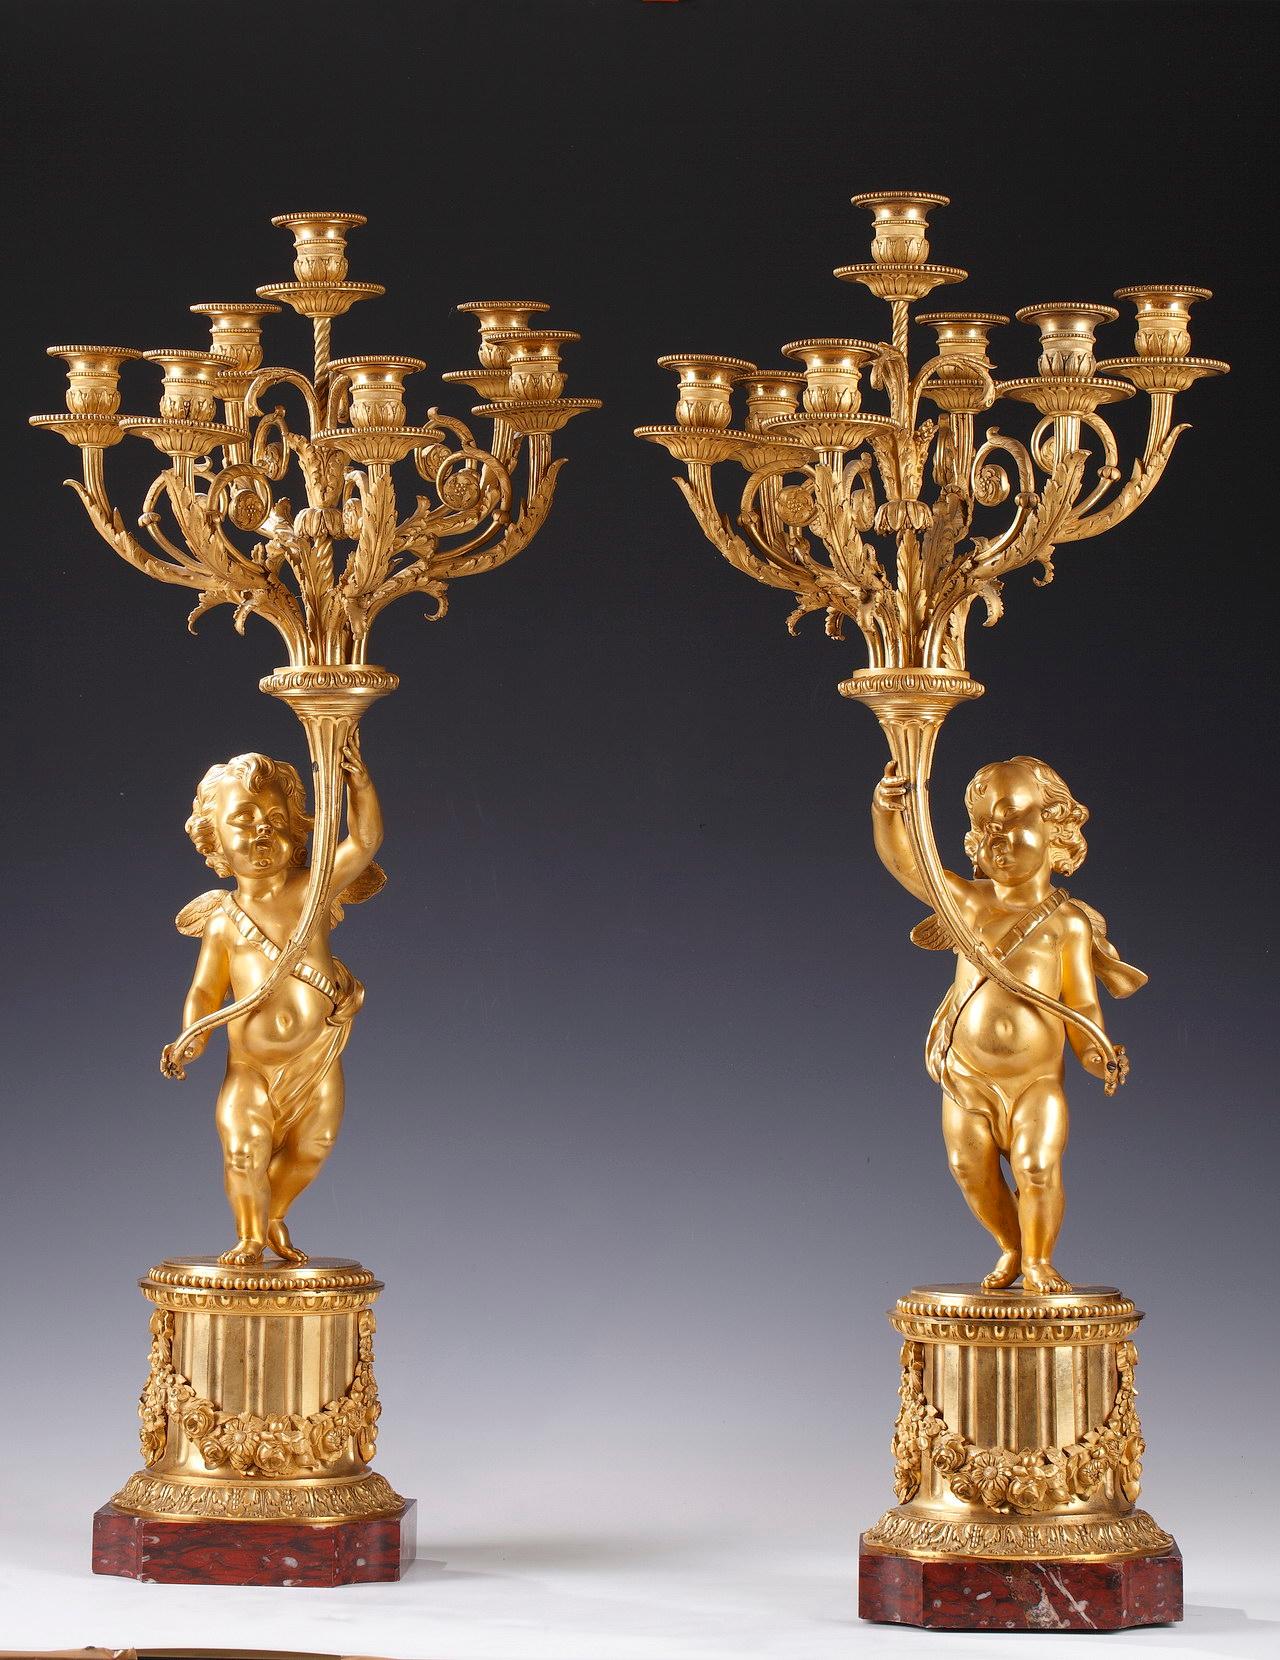 Large pair of candelabras after a model by Clodion, representing two winged putti in gilded bronze, each holding a cornupia containing seven light-arms adorned with foliage. They rest on a square base with curved edges in Griotte marble, surmounted